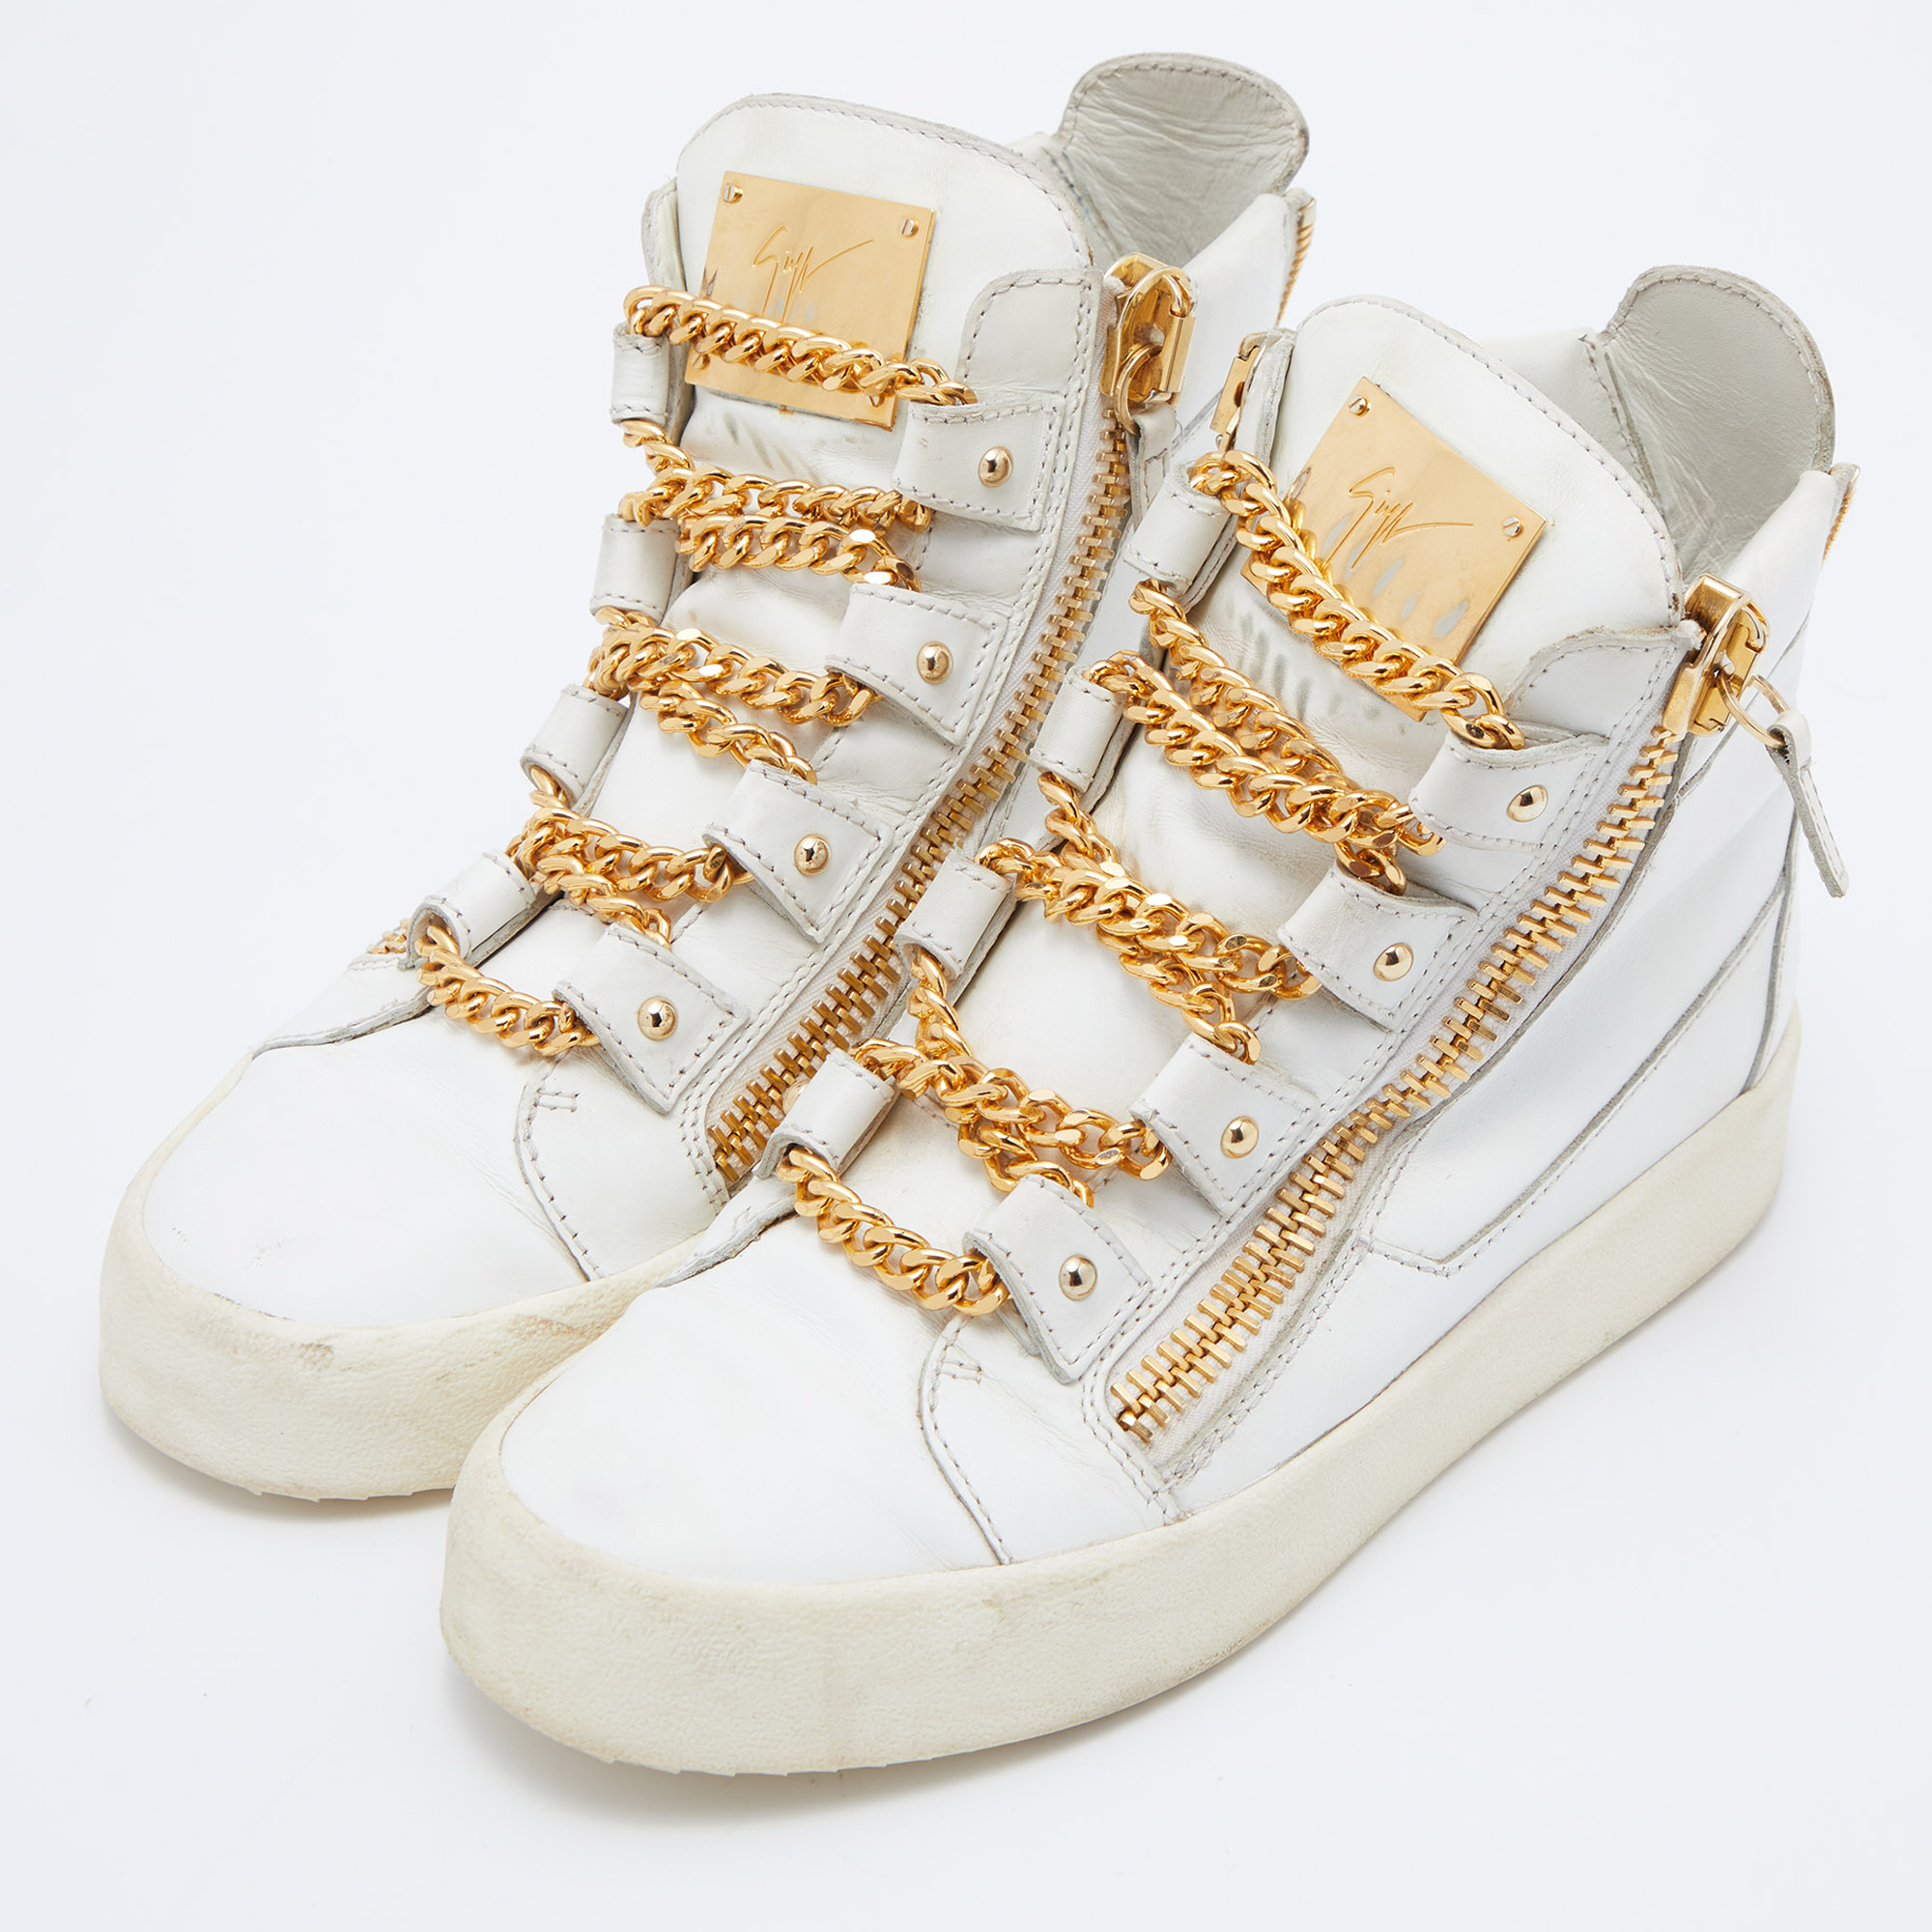 

Giuseppe Zanotti White/Gold Leather Royce Chain High Top Sneakers Size